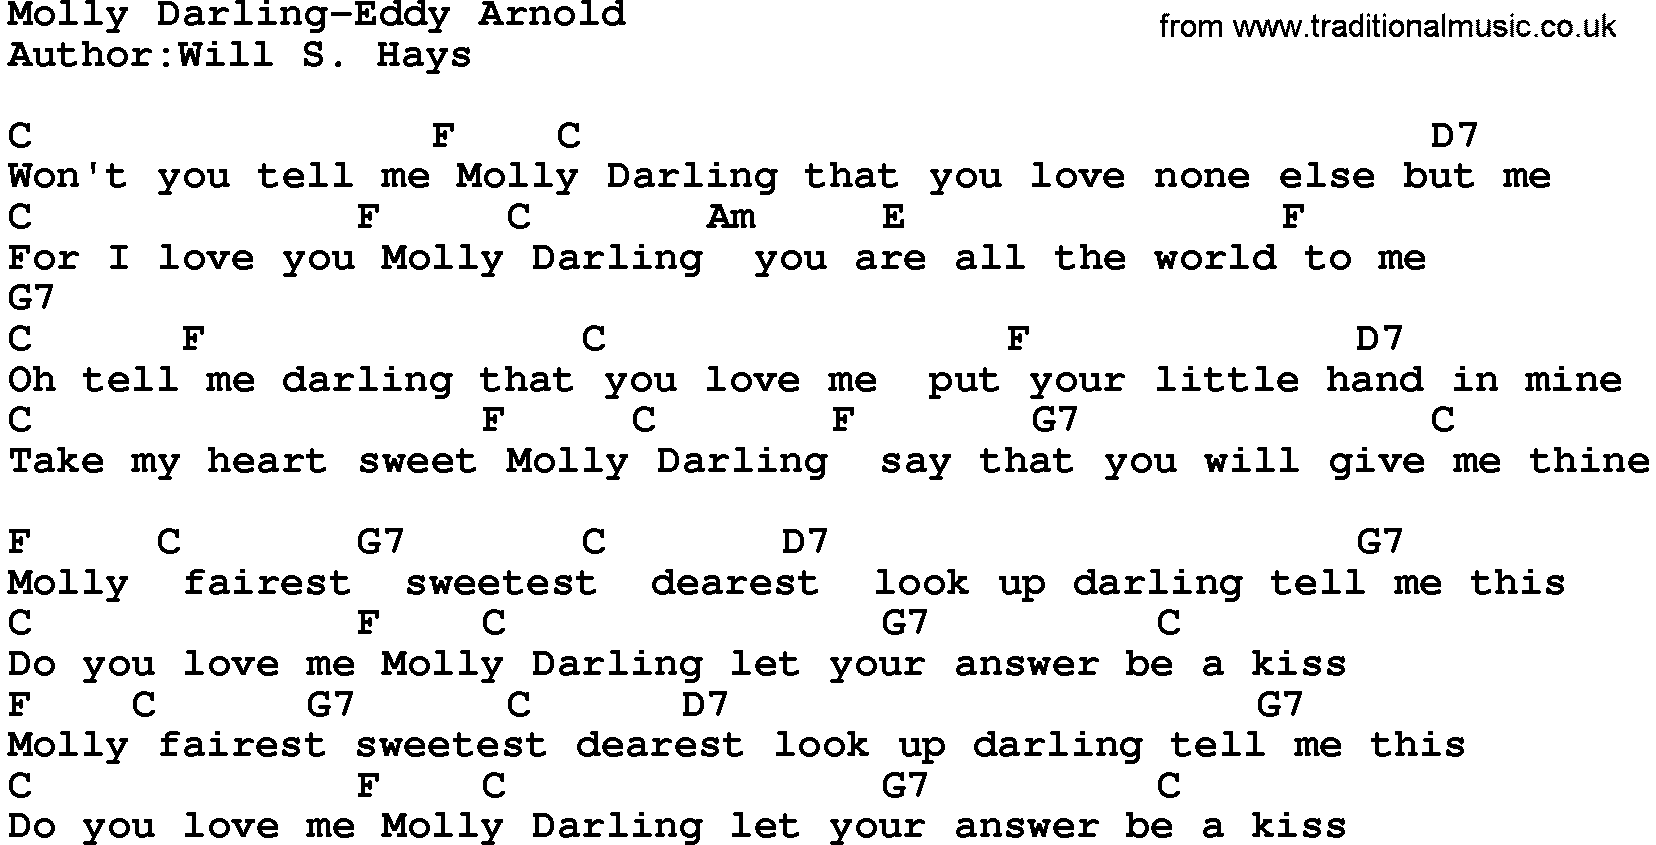 Country music song: Molly Darling-Eddy Arnold lyrics and chords